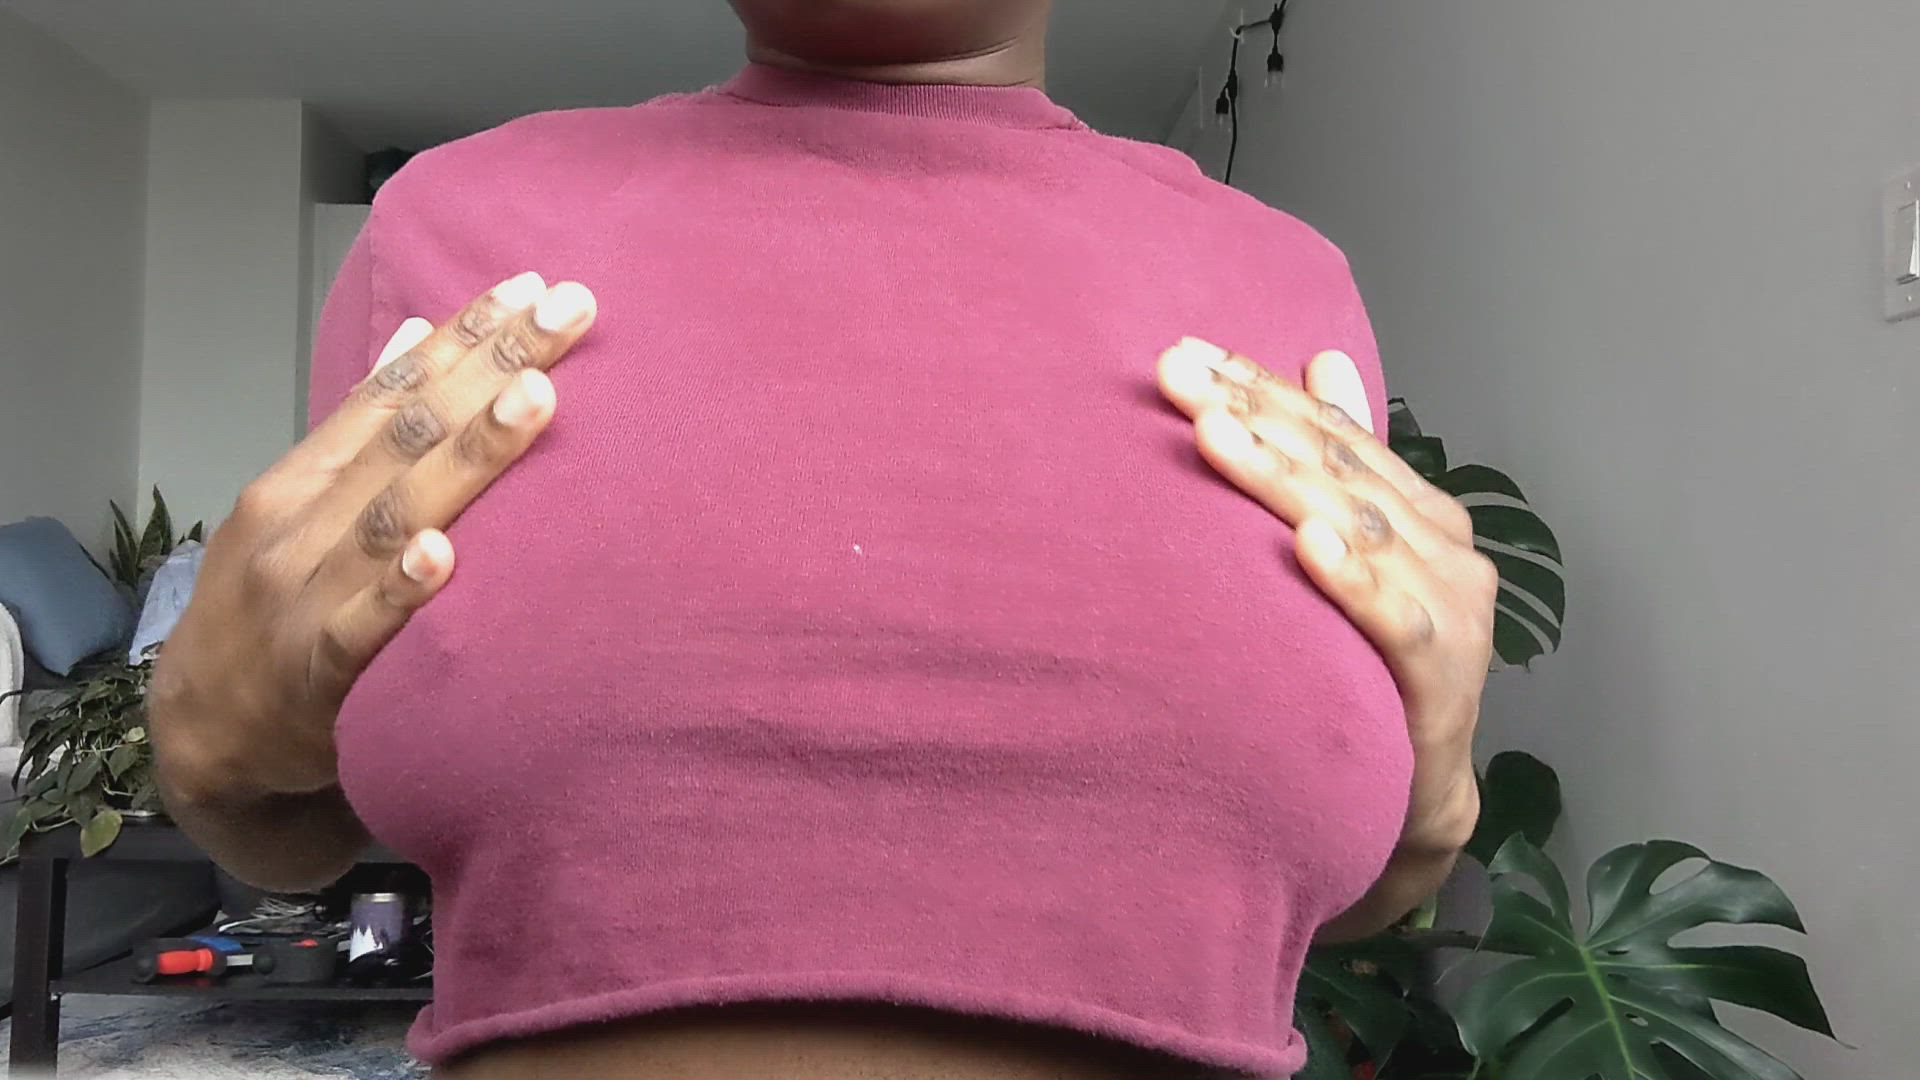 Big Tits porn video with onlyfans model peachrockbod <strong>@evesisaac</strong>